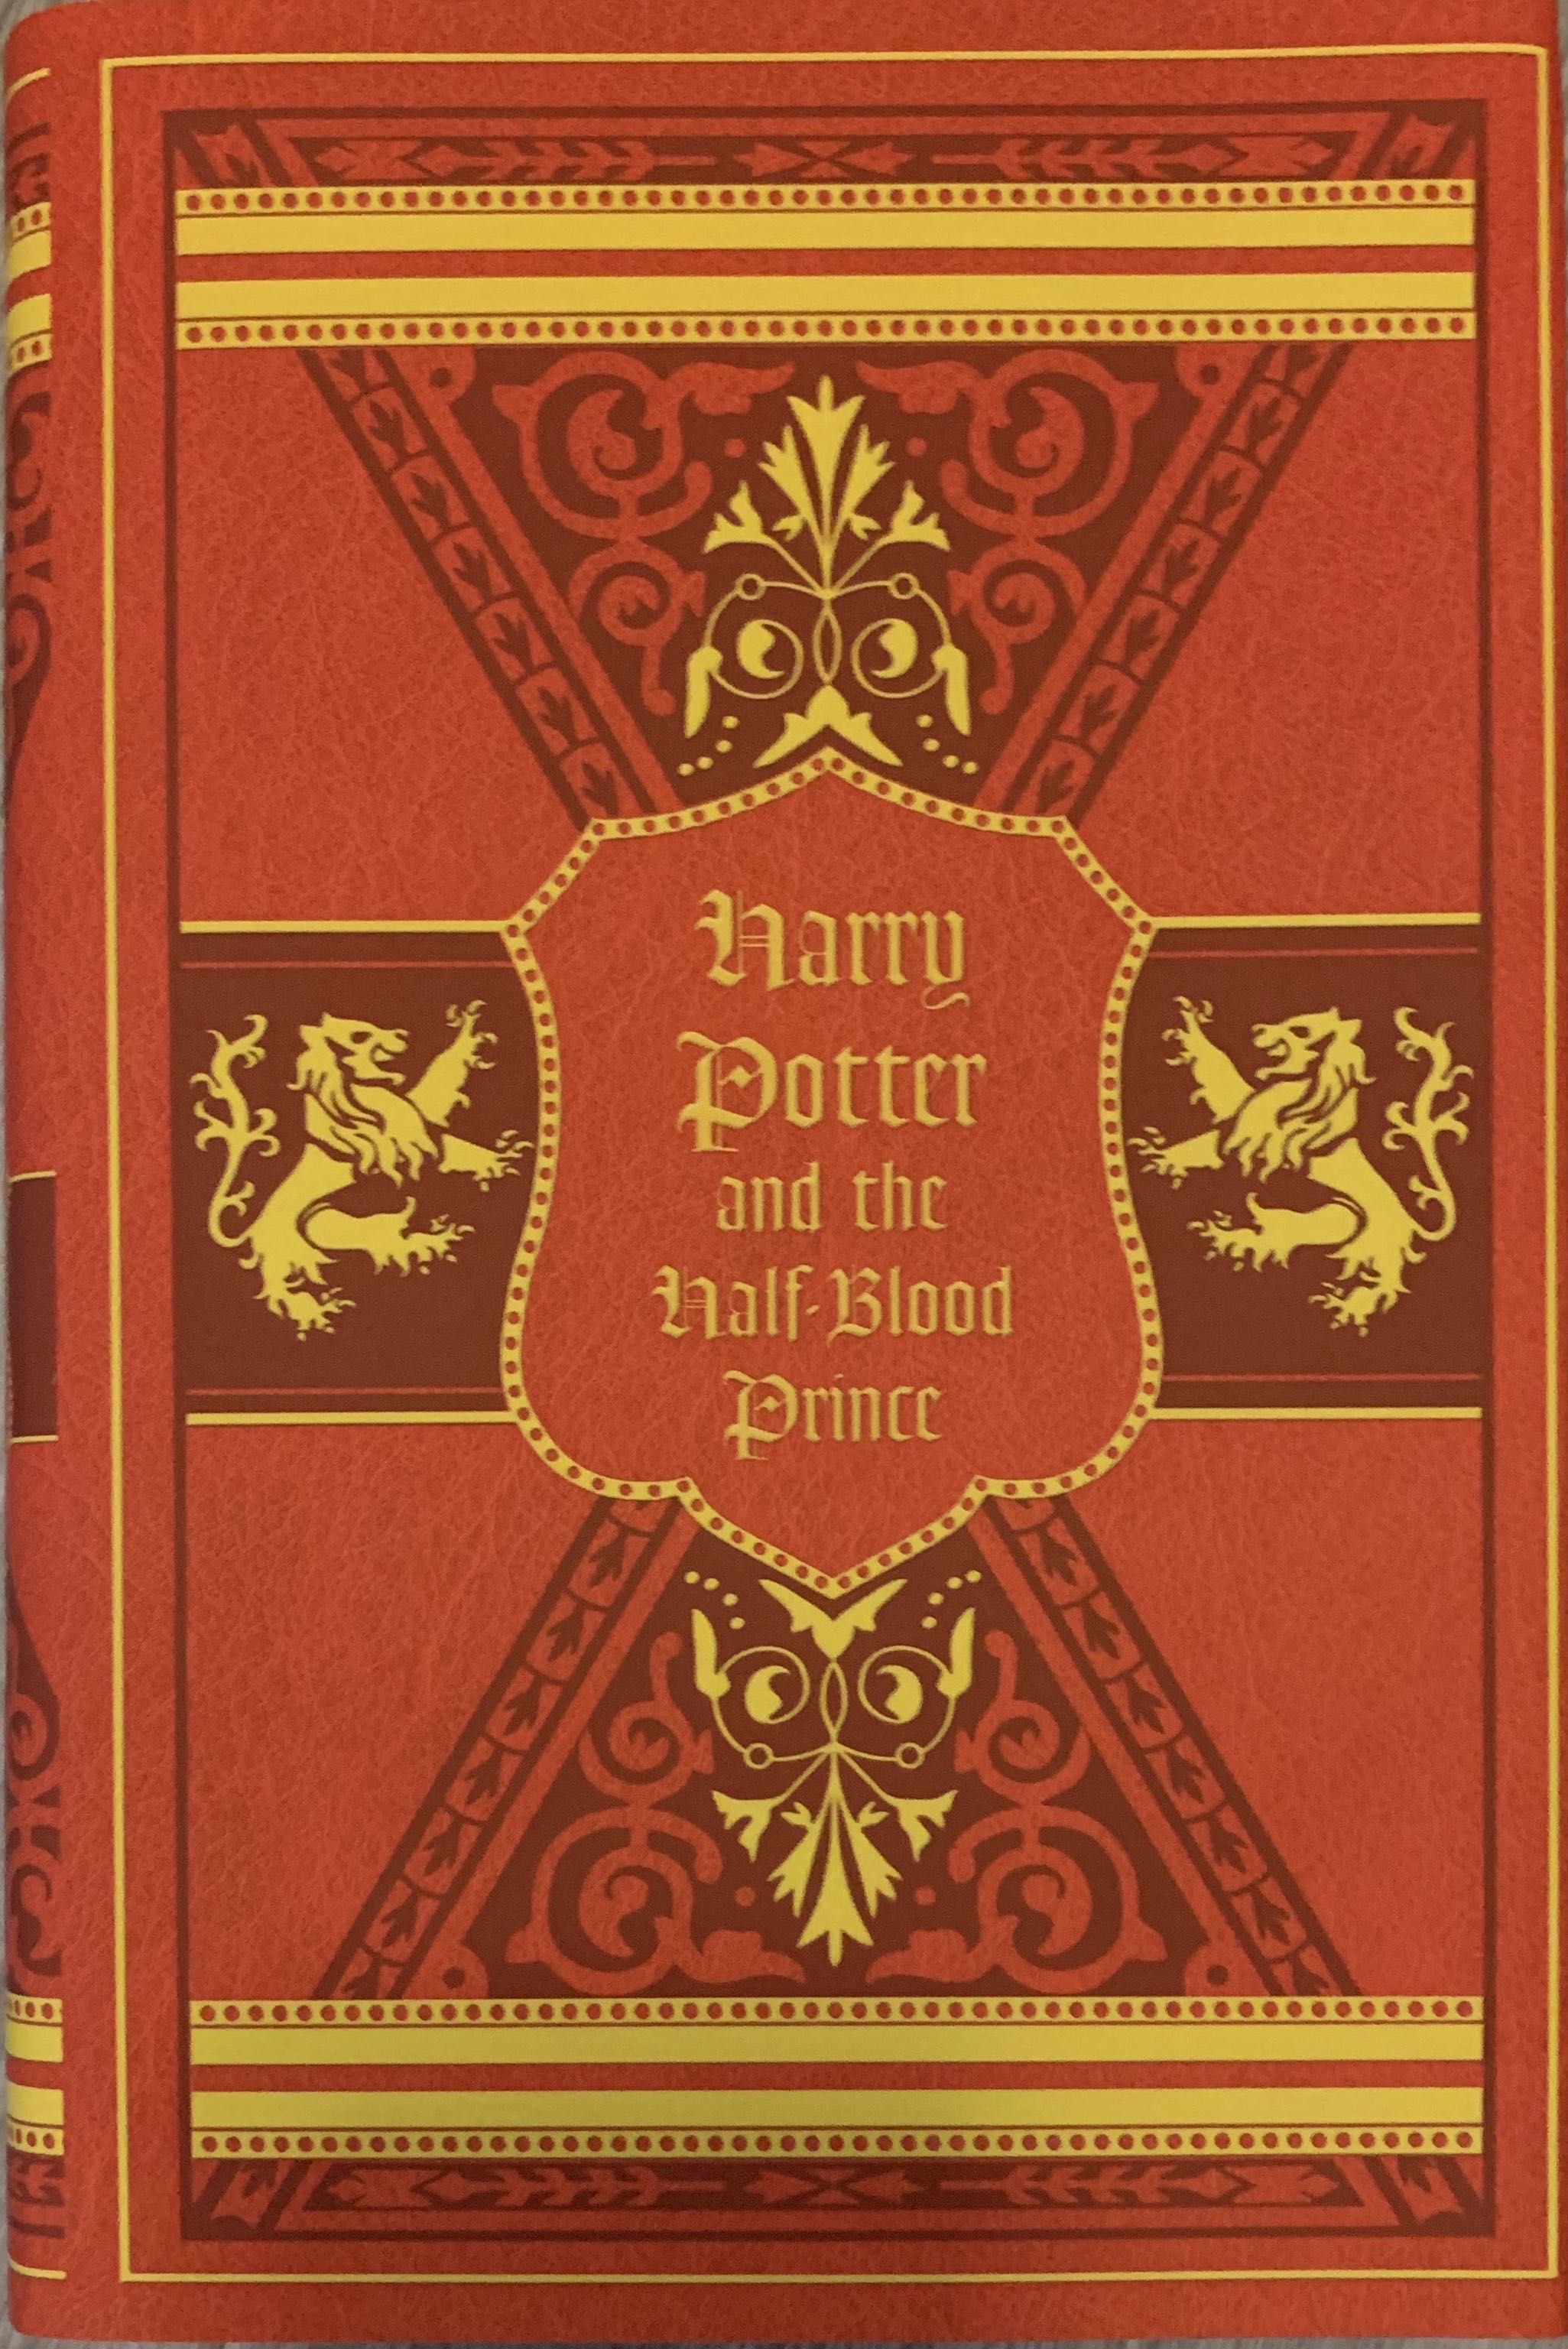 Harry Potter #6 And The Half-Blood Prince - J. K. Rowling (Arthur A. Levine Books - Hardcover) book collectible [Barcode 9780439784542] - Main Image 3